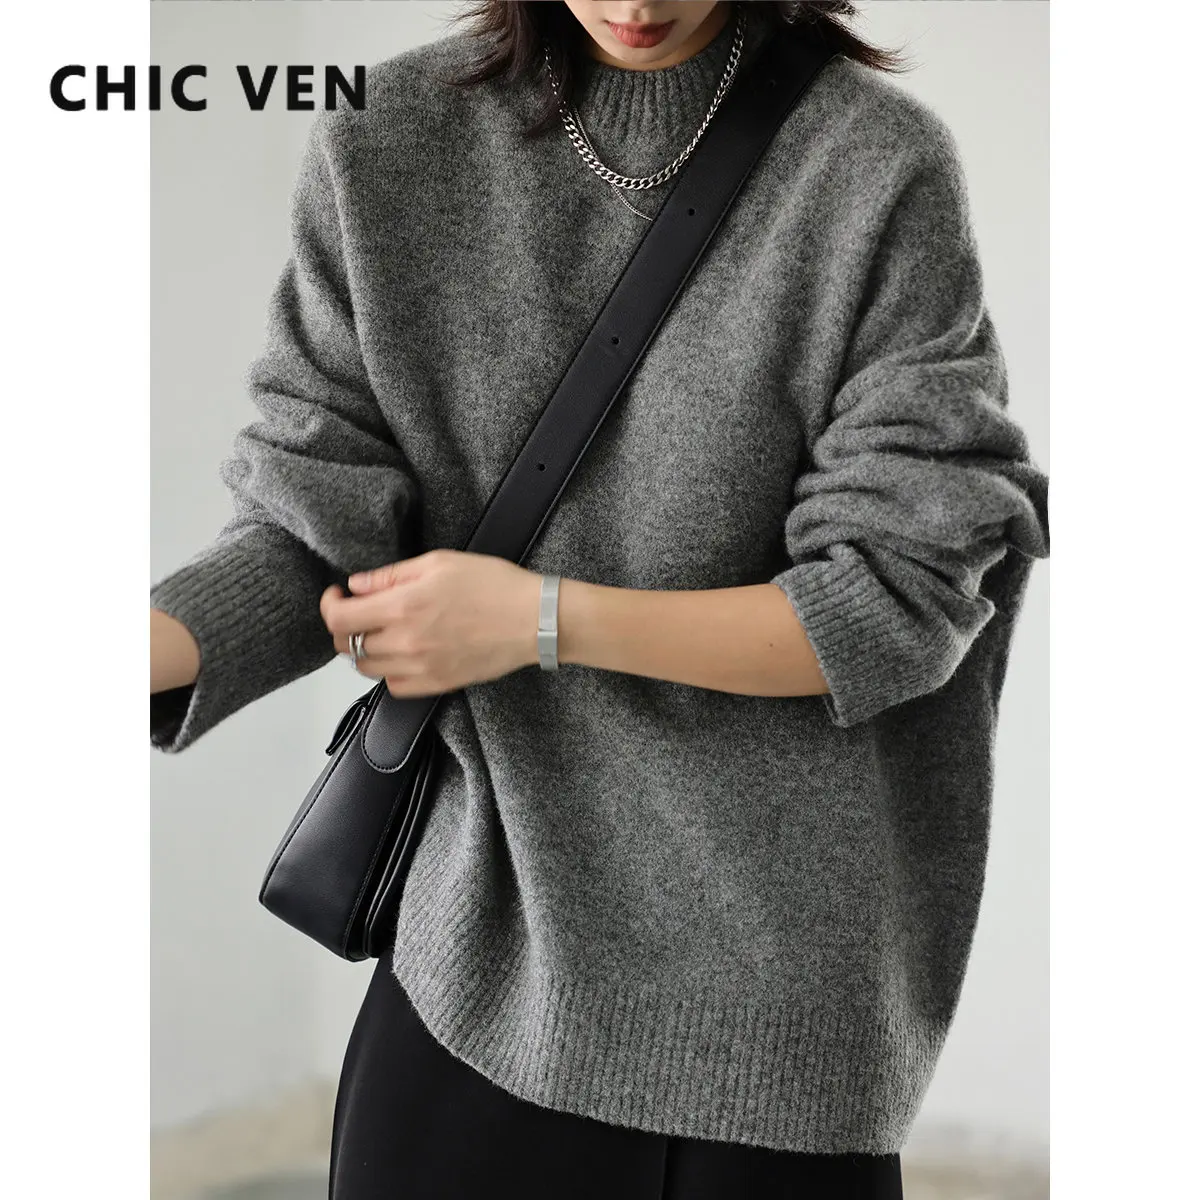 CHIC VEN Women's Sweaters Casual Loose Round Neck Long Sleeve Knitted Jumpers Female Tops Pullovers Autumn Winter 2022